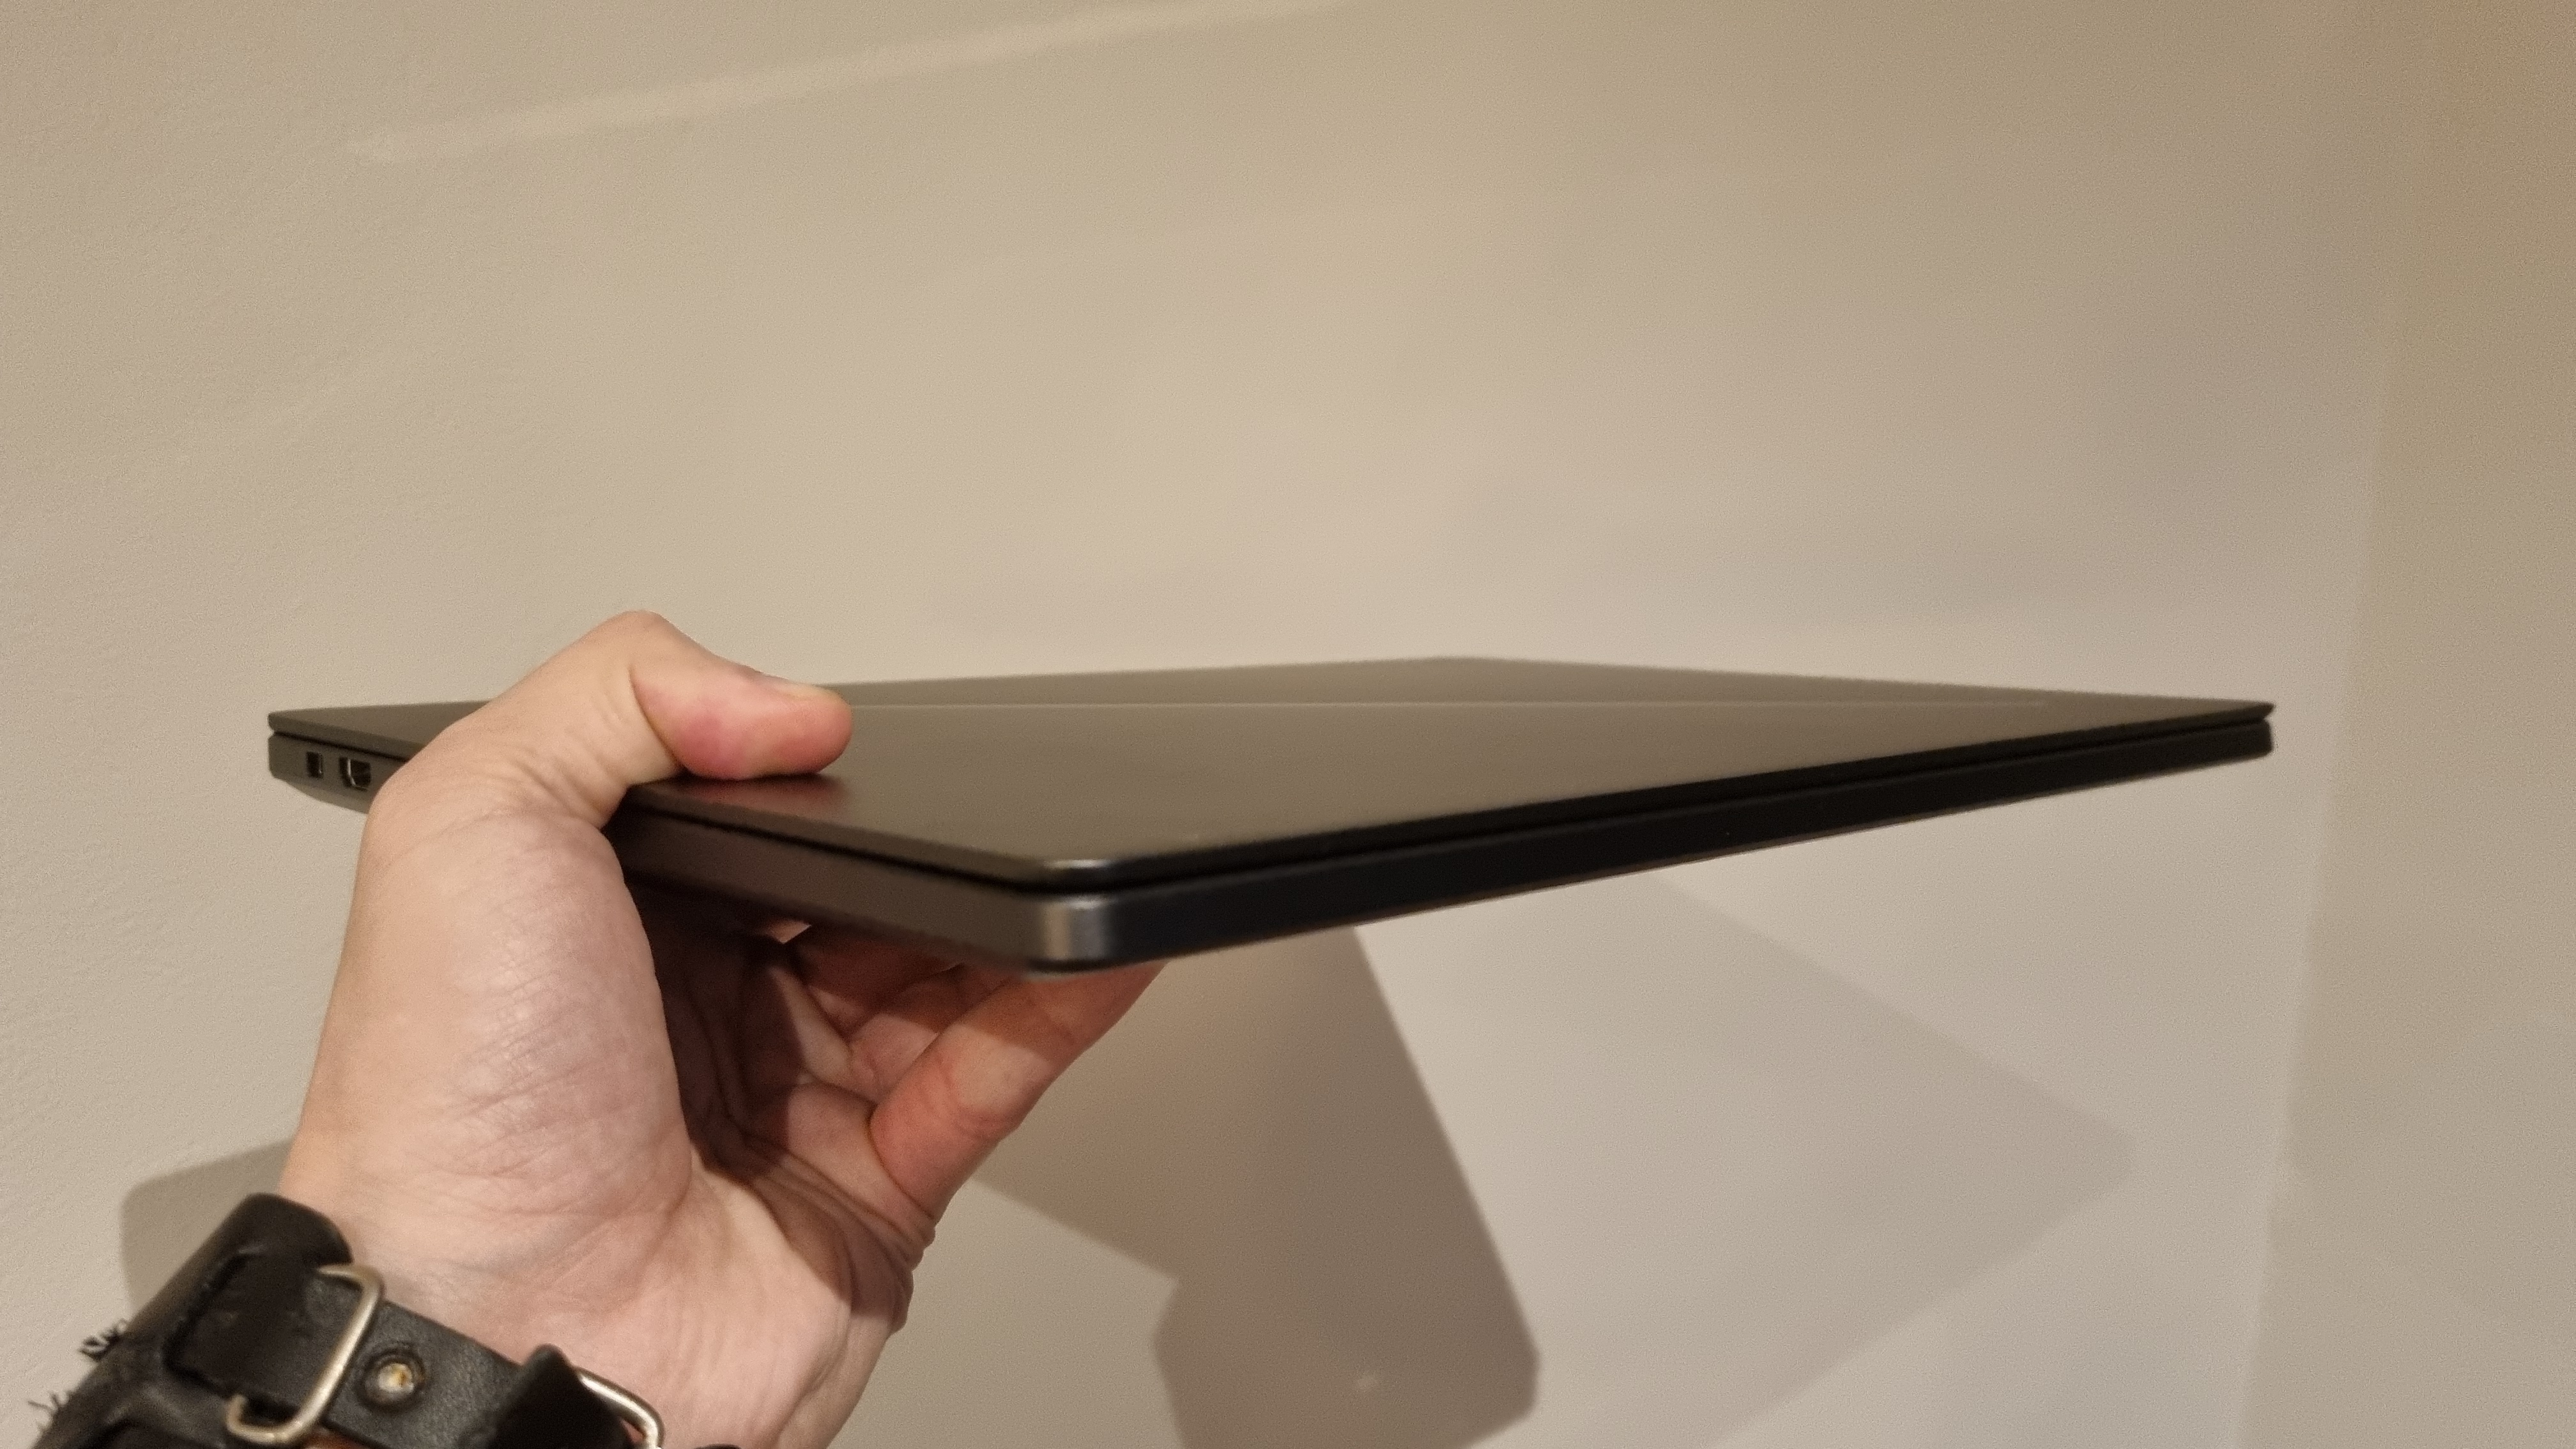 The Asus ROG Zephyrus G16 held in one hand to demonstrate the light weight and slim form factor